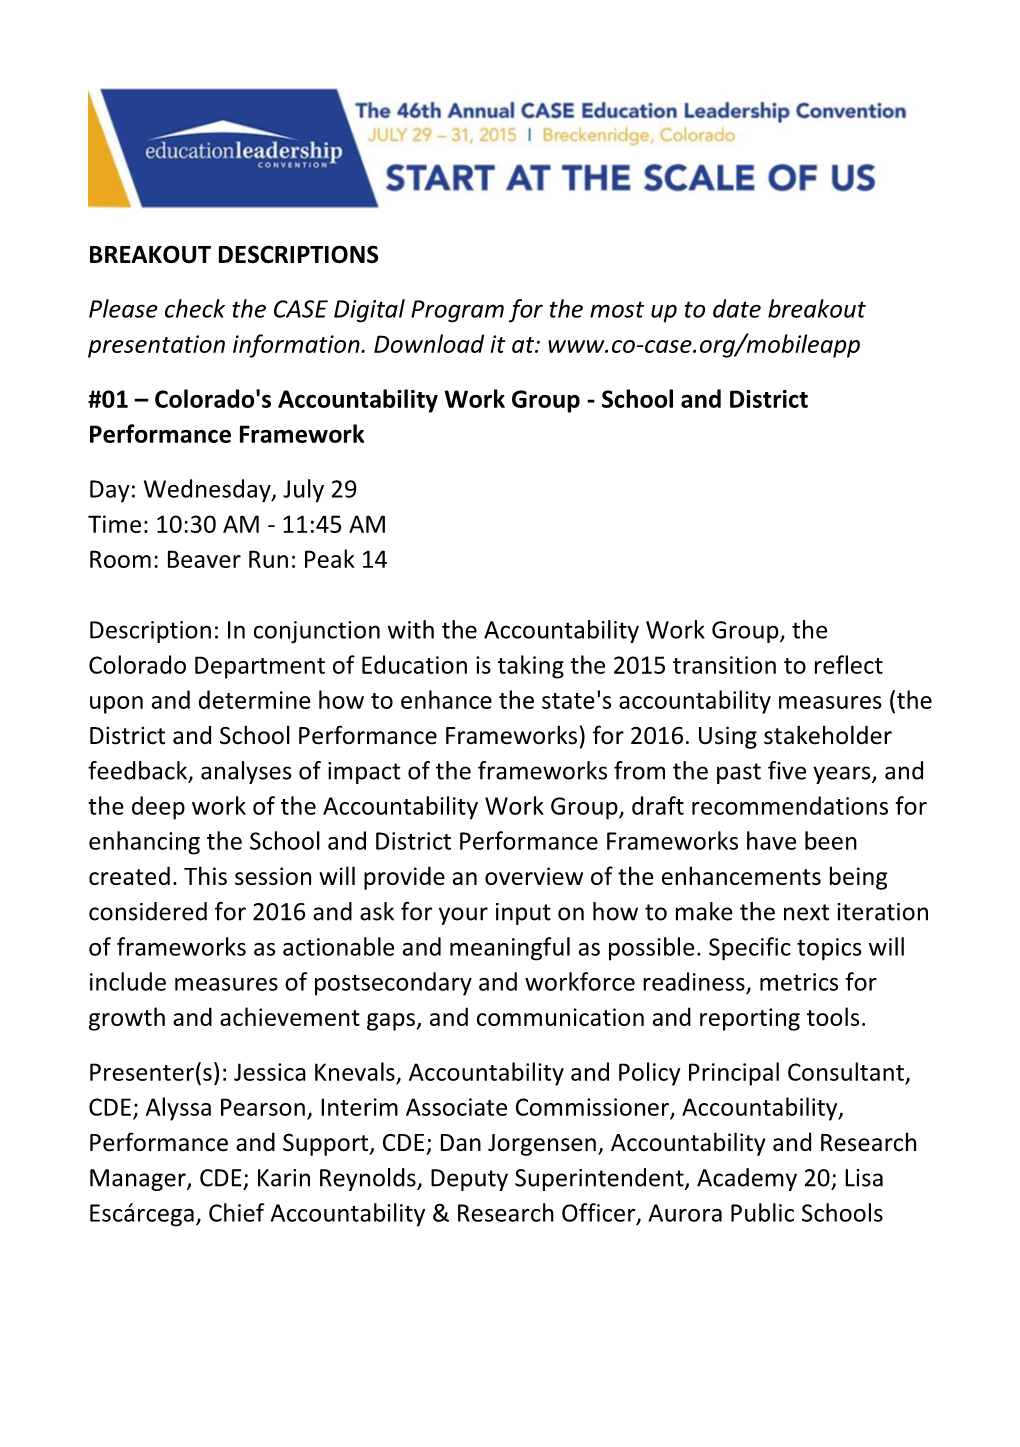 BREAKOUT DESCRIPTIONS Please Check the CASE Digital Program for the Most up to Date Breakout Presentation Information. Download